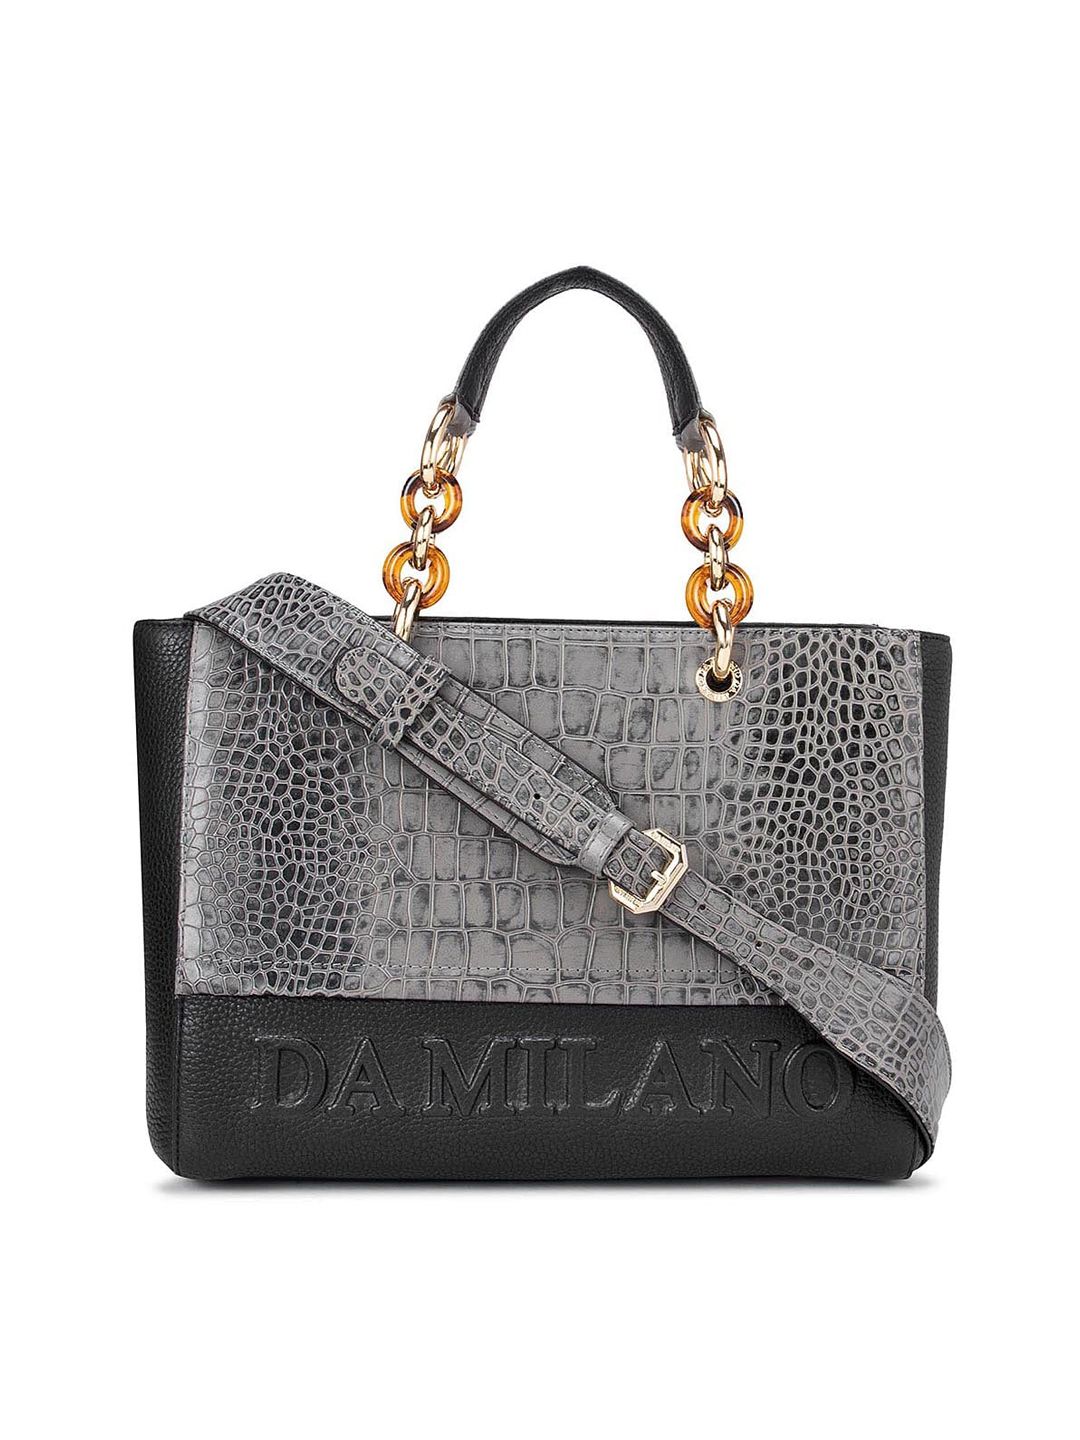 Da Milano Grey Animal Textured Leather Structured Handheld Bag with Cut Work Price in India